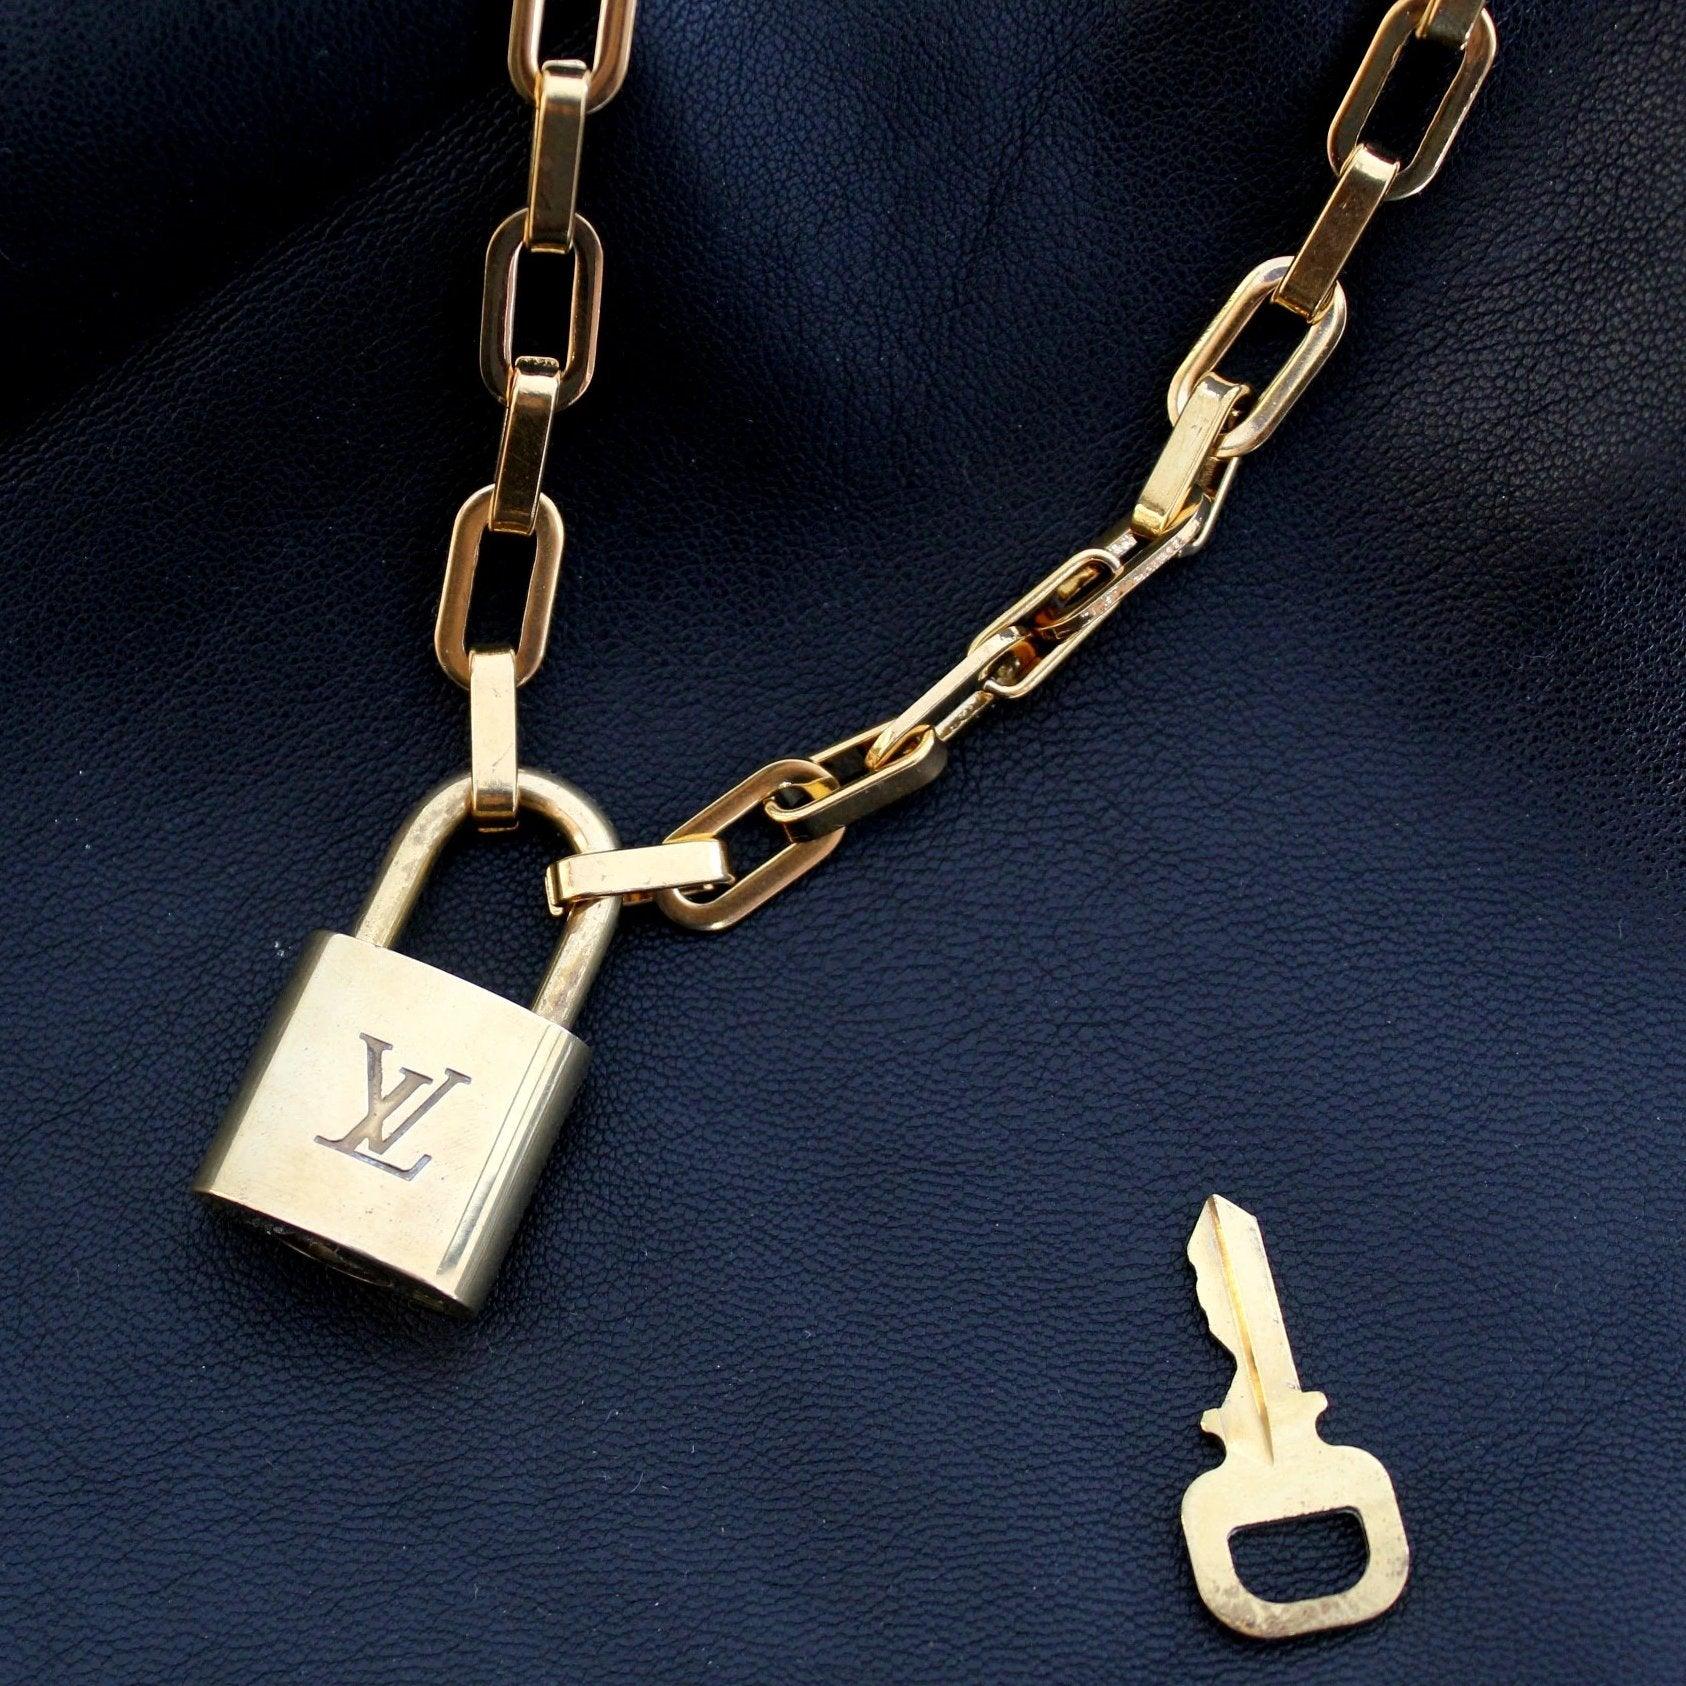 Louis Vuitton, Jewelry, Louis Vuitton Silvertoned Lock And Keys Set On 6  Link Chain Necklace